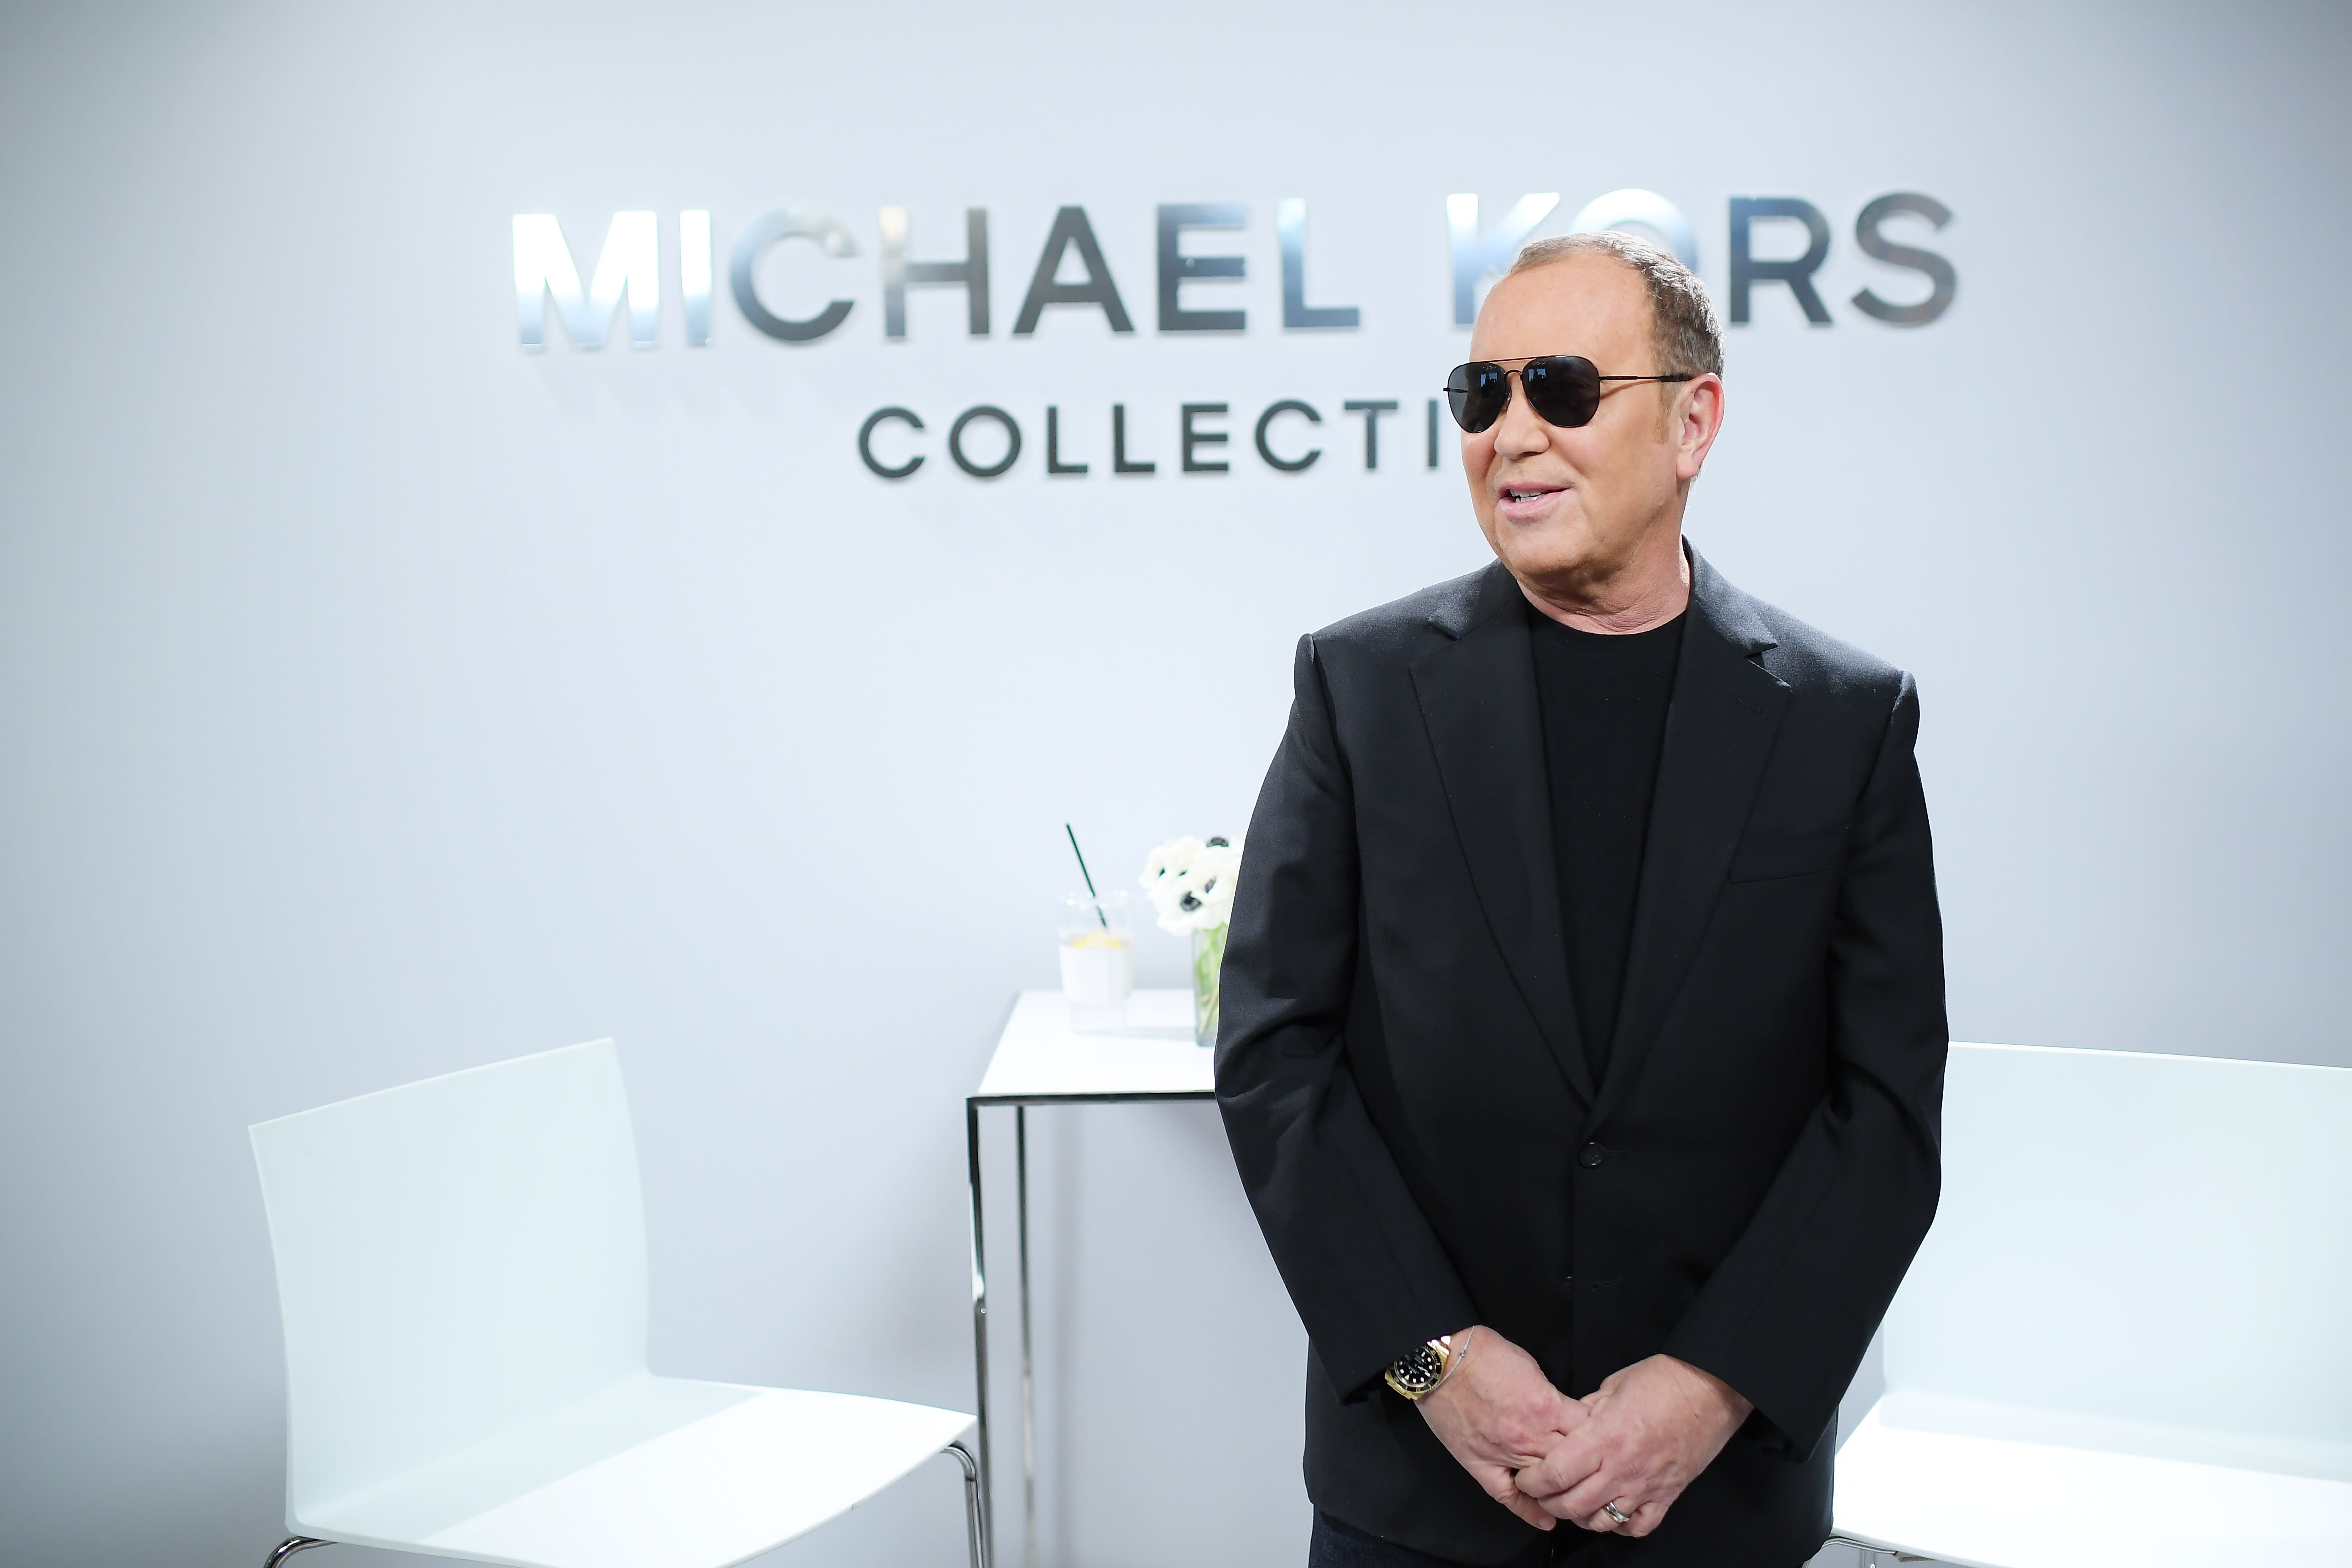 versace bought by mk